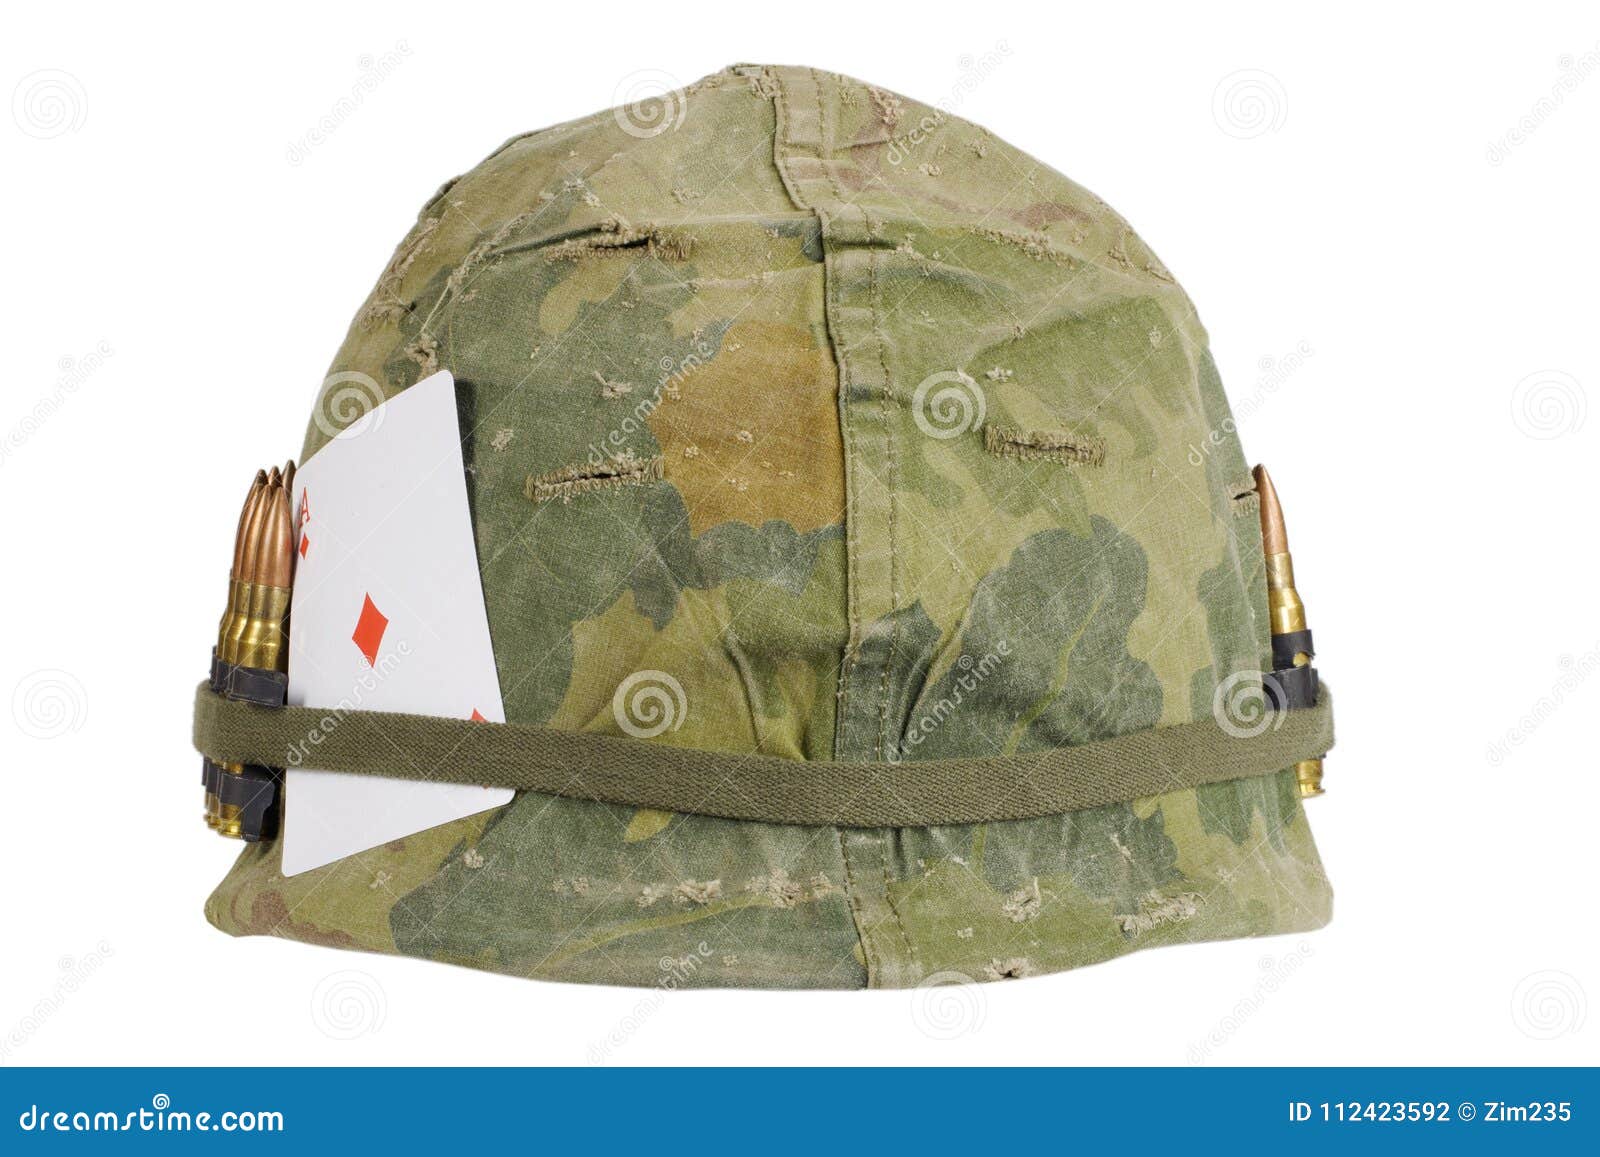 US Army Helmet Vietnam War Period With Camouflage Cover And Ammo Belt